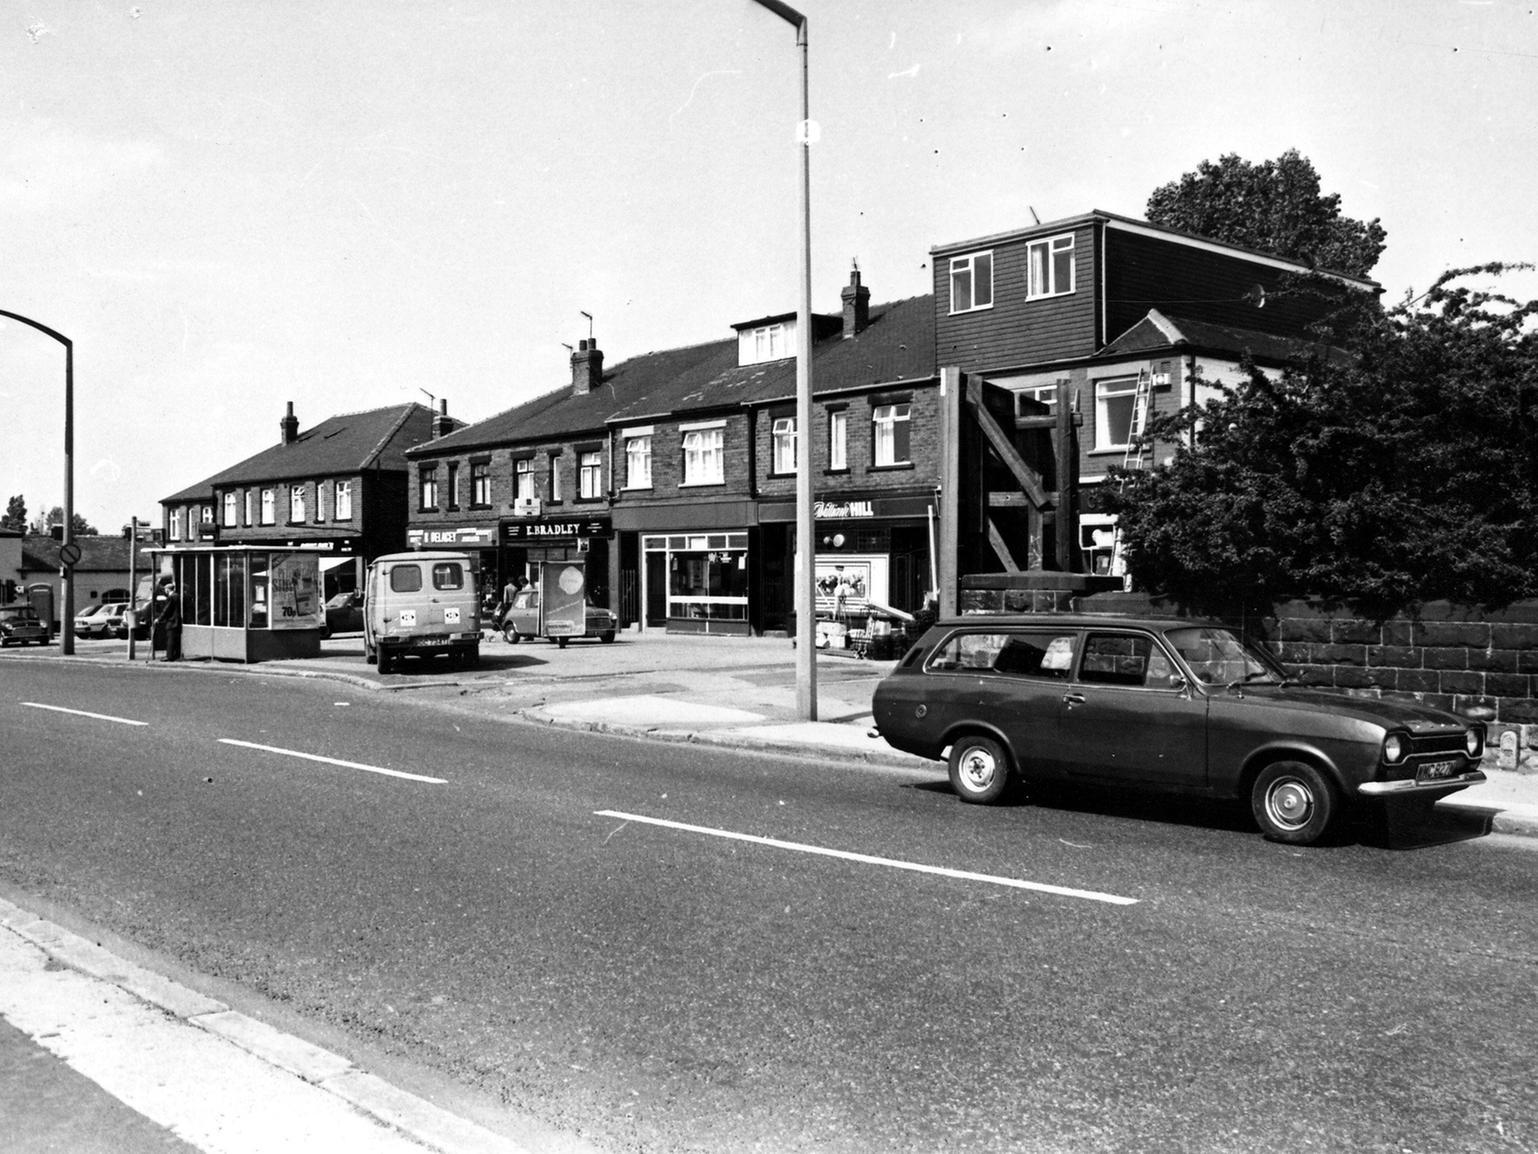 Allenby Parade, a row of shops on Ring Road Beeston Park. Businesses include R. Delacey, Jeweller, E. Bradley, and William Hill, bookmakers. On the far left of the picture is the Tommy Wass pub.